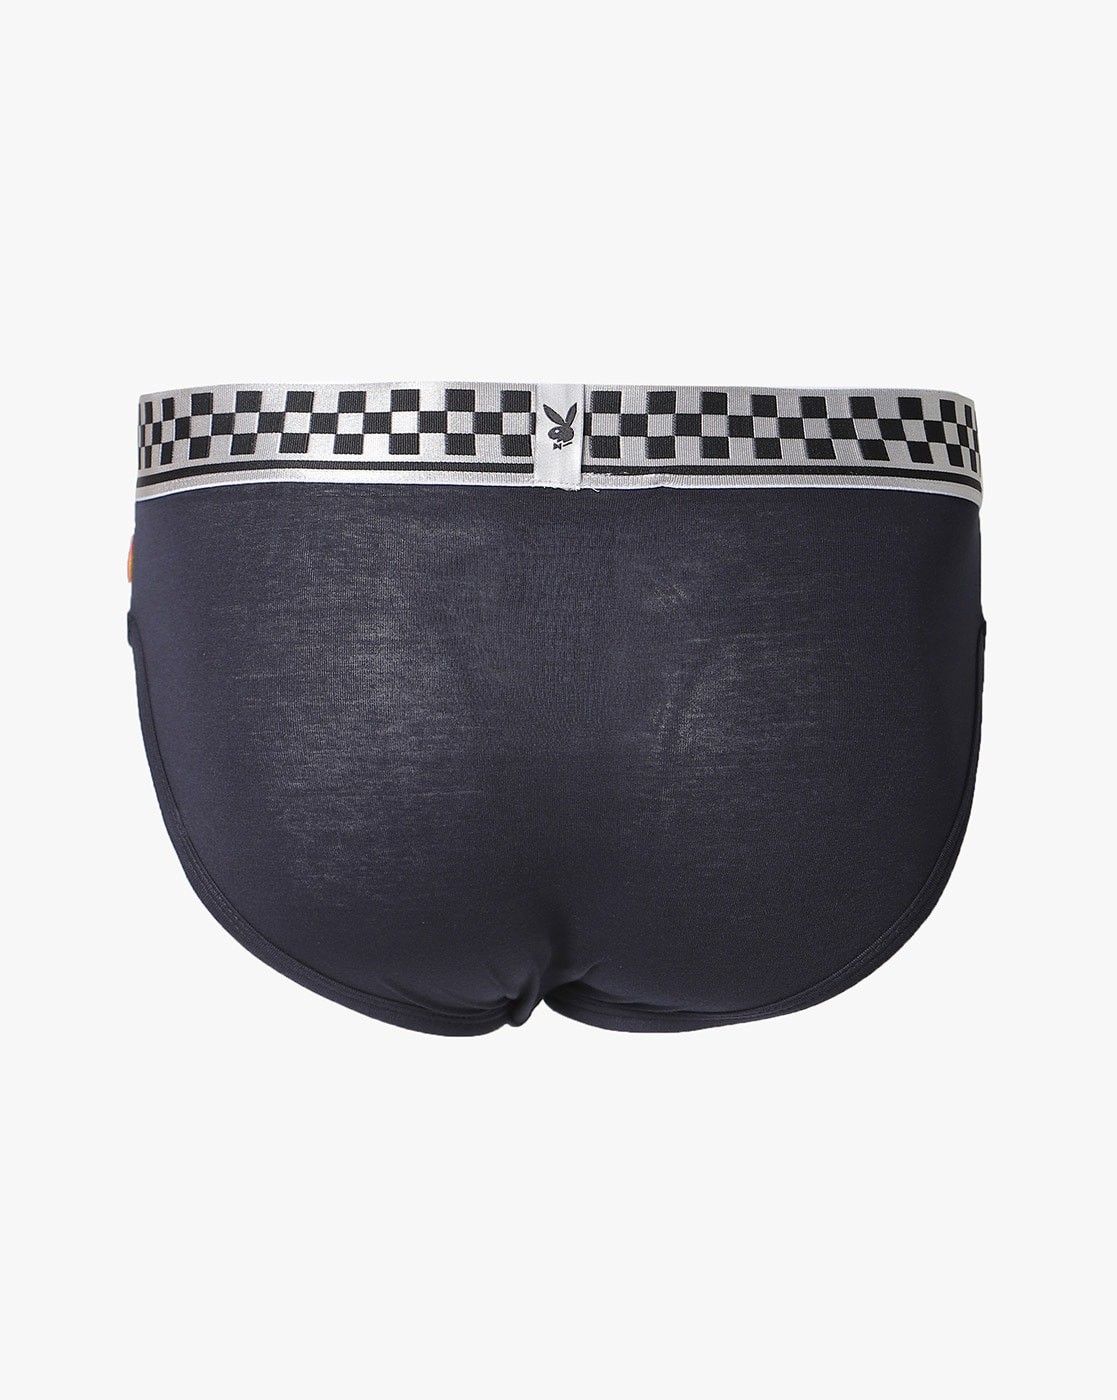 Buy Navy Blue Briefs for Men by Playboy Online